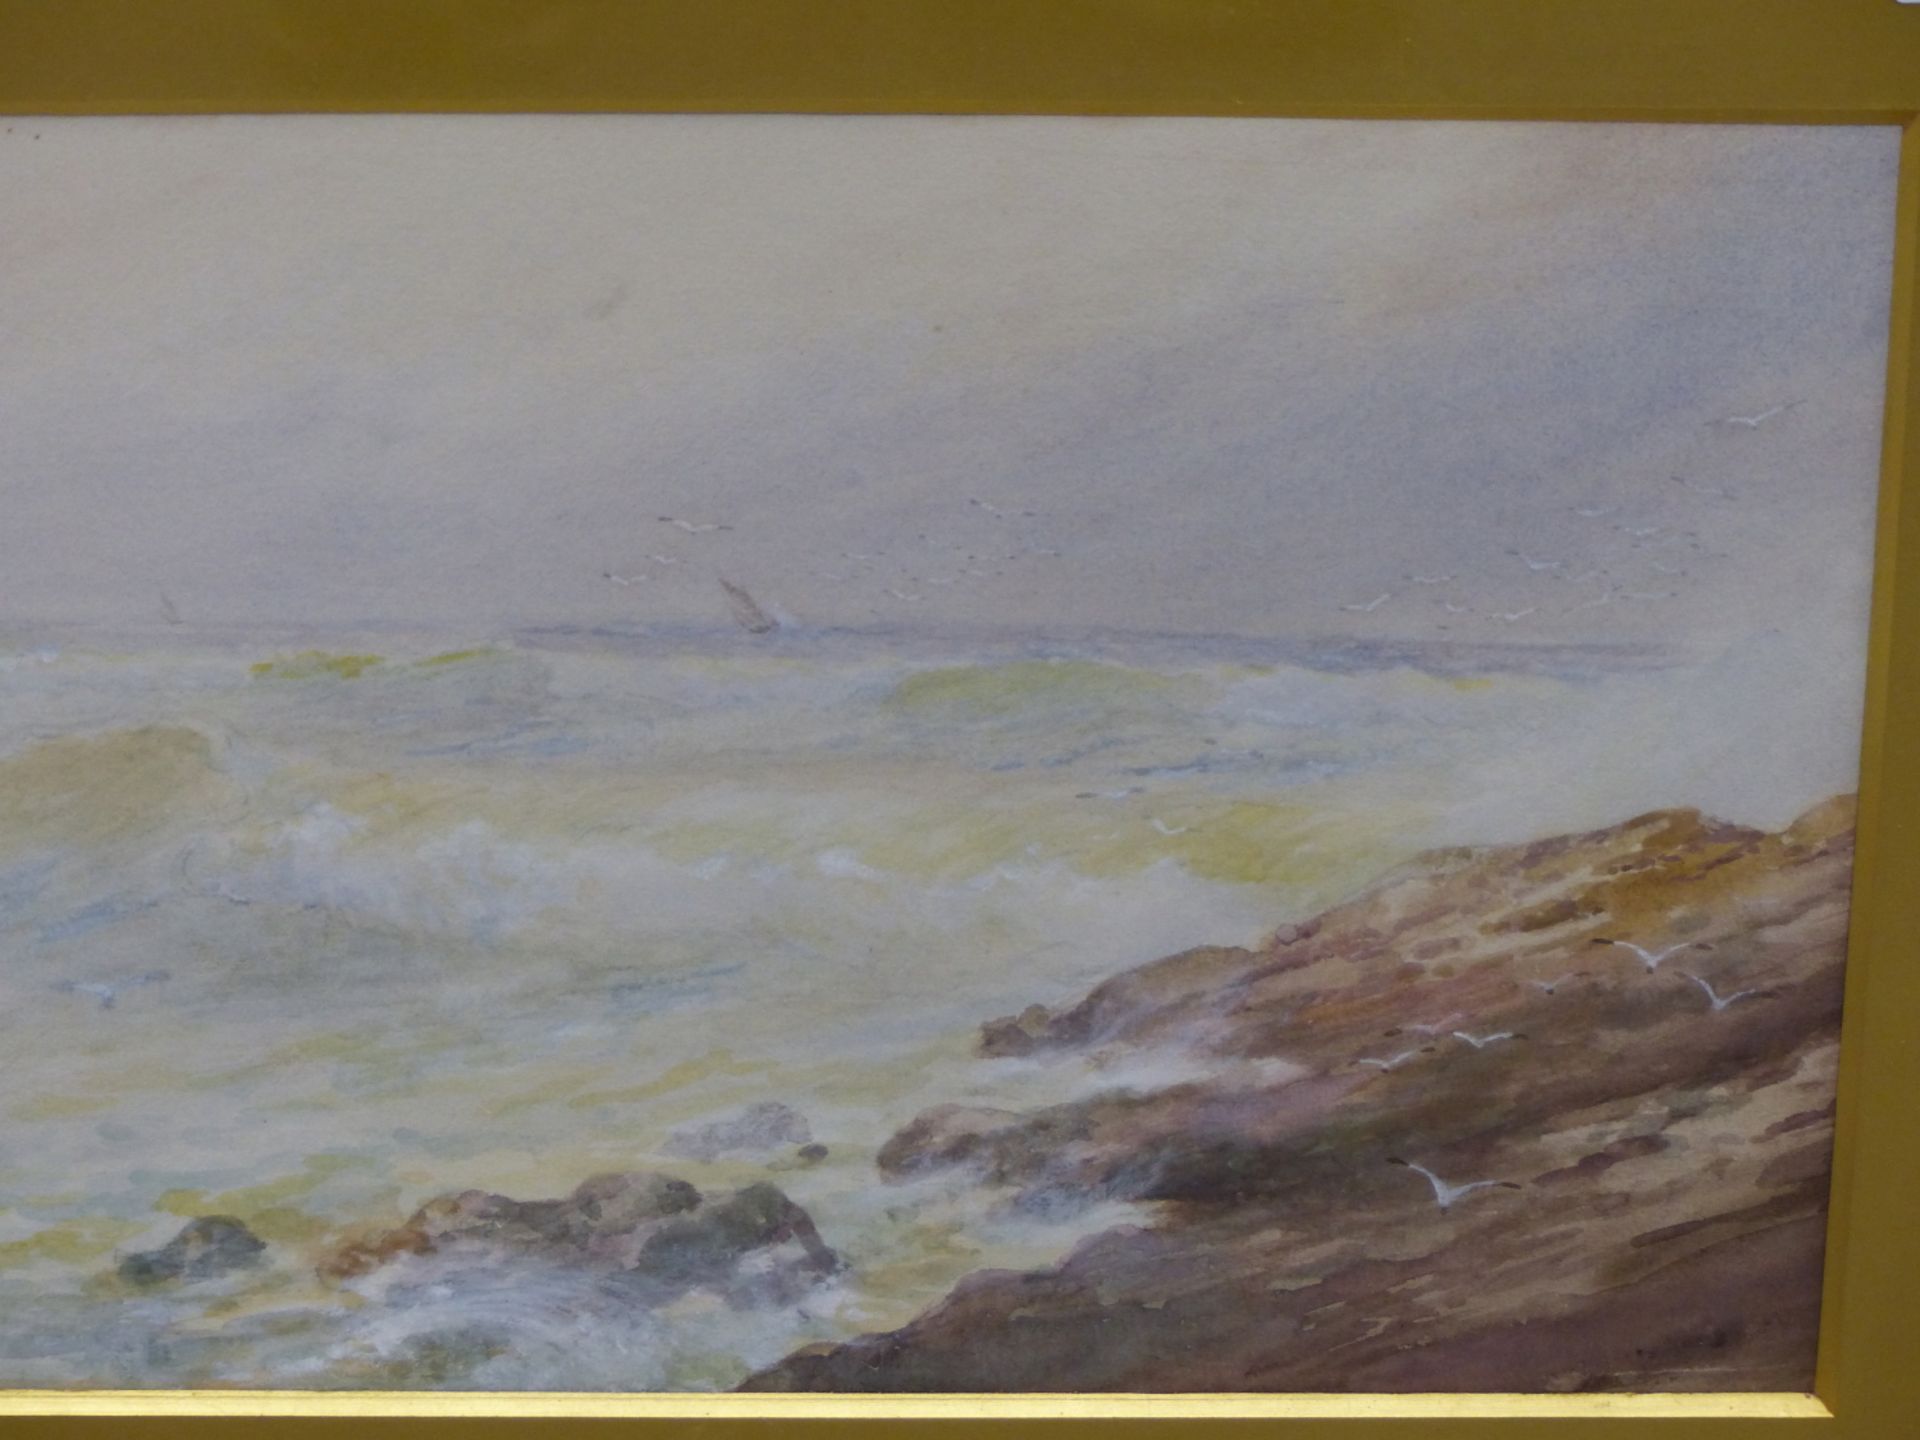 ATTRB. THOMAS HERBERT VICTOR ( AKA W. SANDS) ON THE CORNISH COAST. SIGNED WILL SANDS 1912. - Image 4 of 6